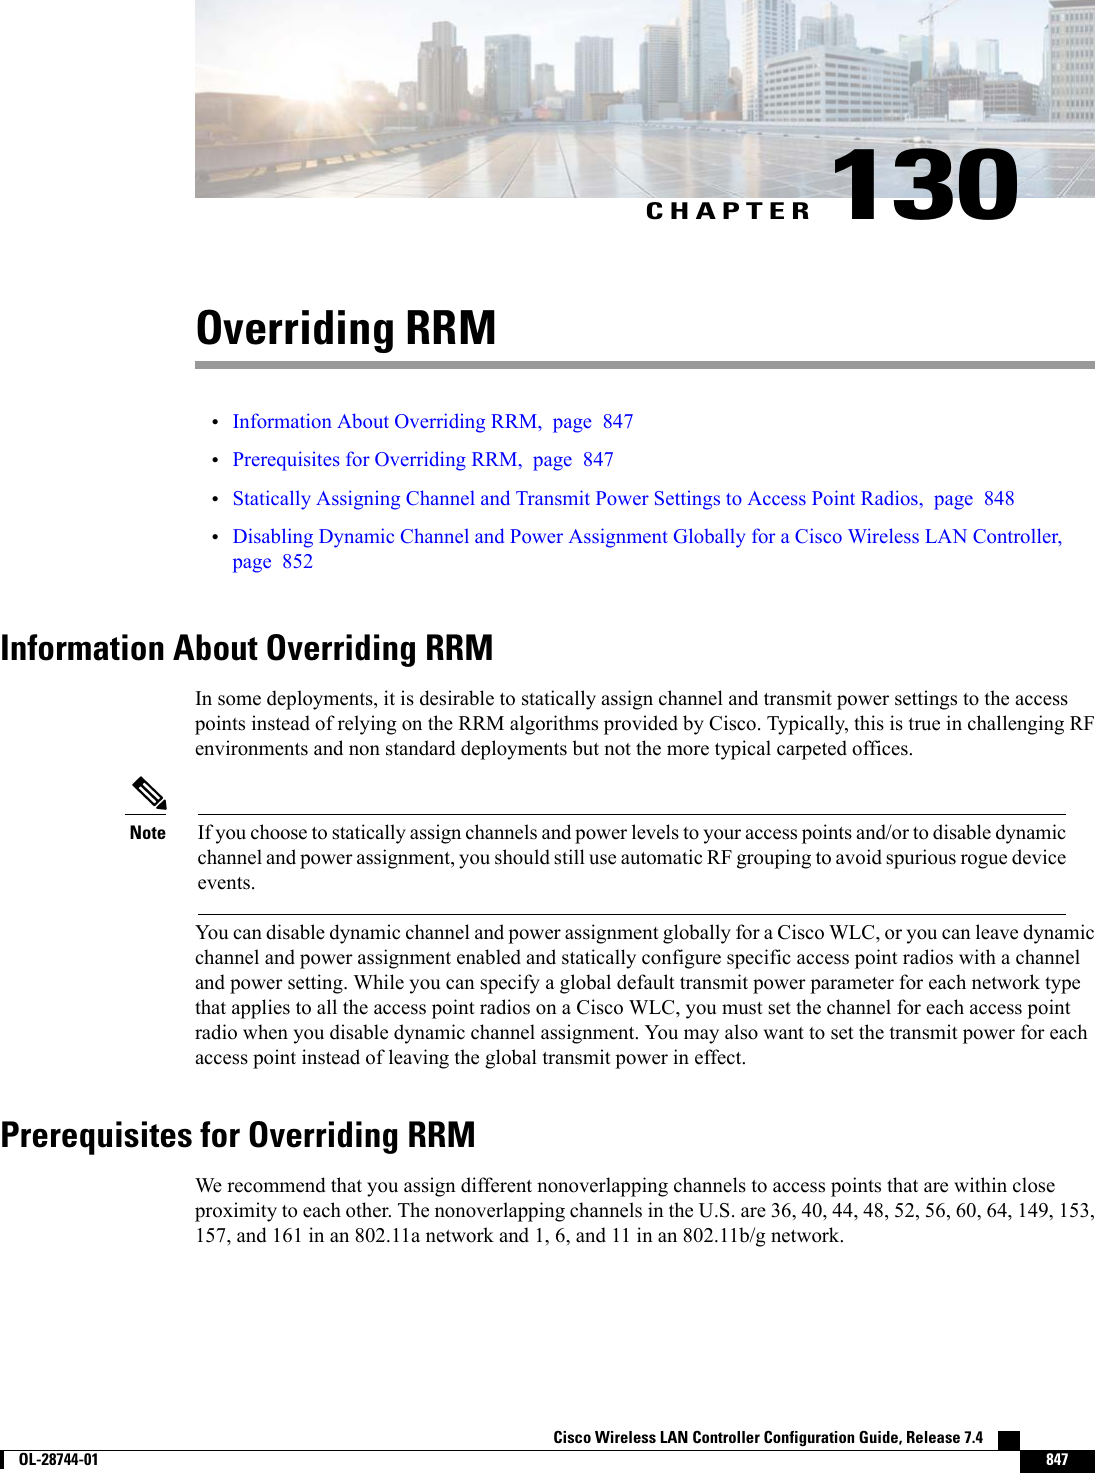 CHAPTER 130Overriding RRM•Information About Overriding RRM, page 847•Prerequisites for Overriding RRM, page 847•Statically Assigning Channel and Transmit Power Settings to Access Point Radios, page 848•Disabling Dynamic Channel and Power Assignment Globally for a Cisco Wireless LAN Controller,page 852Information About Overriding RRMIn some deployments, it is desirable to statically assign channel and transmit power settings to the accesspoints instead of relying on the RRM algorithms provided by Cisco. Typically, this is true in challenging RFenvironments and non standard deployments but not the more typical carpeted offices.If you choose to statically assign channels and power levels to your access points and/or to disable dynamicchannel and power assignment, you should still use automatic RF grouping to avoid spurious rogue deviceevents.NoteYou can disable dynamic channel and power assignment globally for a Cisco WLC, or you can leave dynamicchannel and power assignment enabled and statically configure specific access point radios with a channeland power setting. While you can specify a global default transmit power parameter for each network typethat applies to all the access point radios on a Cisco WLC, you must set the channel for each access pointradio when you disable dynamic channel assignment. You may also want to set the transmit power for eachaccess point instead of leaving the global transmit power in effect.Prerequisites for Overriding RRMWe recommend that you assign different nonoverlapping channels to access points that are within closeproximity to each other. The nonoverlapping channels in the U.S. are 36, 40, 44, 48, 52, 56, 60, 64, 149, 153,157, and 161 in an 802.11a network and 1, 6, and 11 in an 802.11b/g network.Cisco Wireless LAN Controller Configuration Guide, Release 7.4        OL-28744-01 847